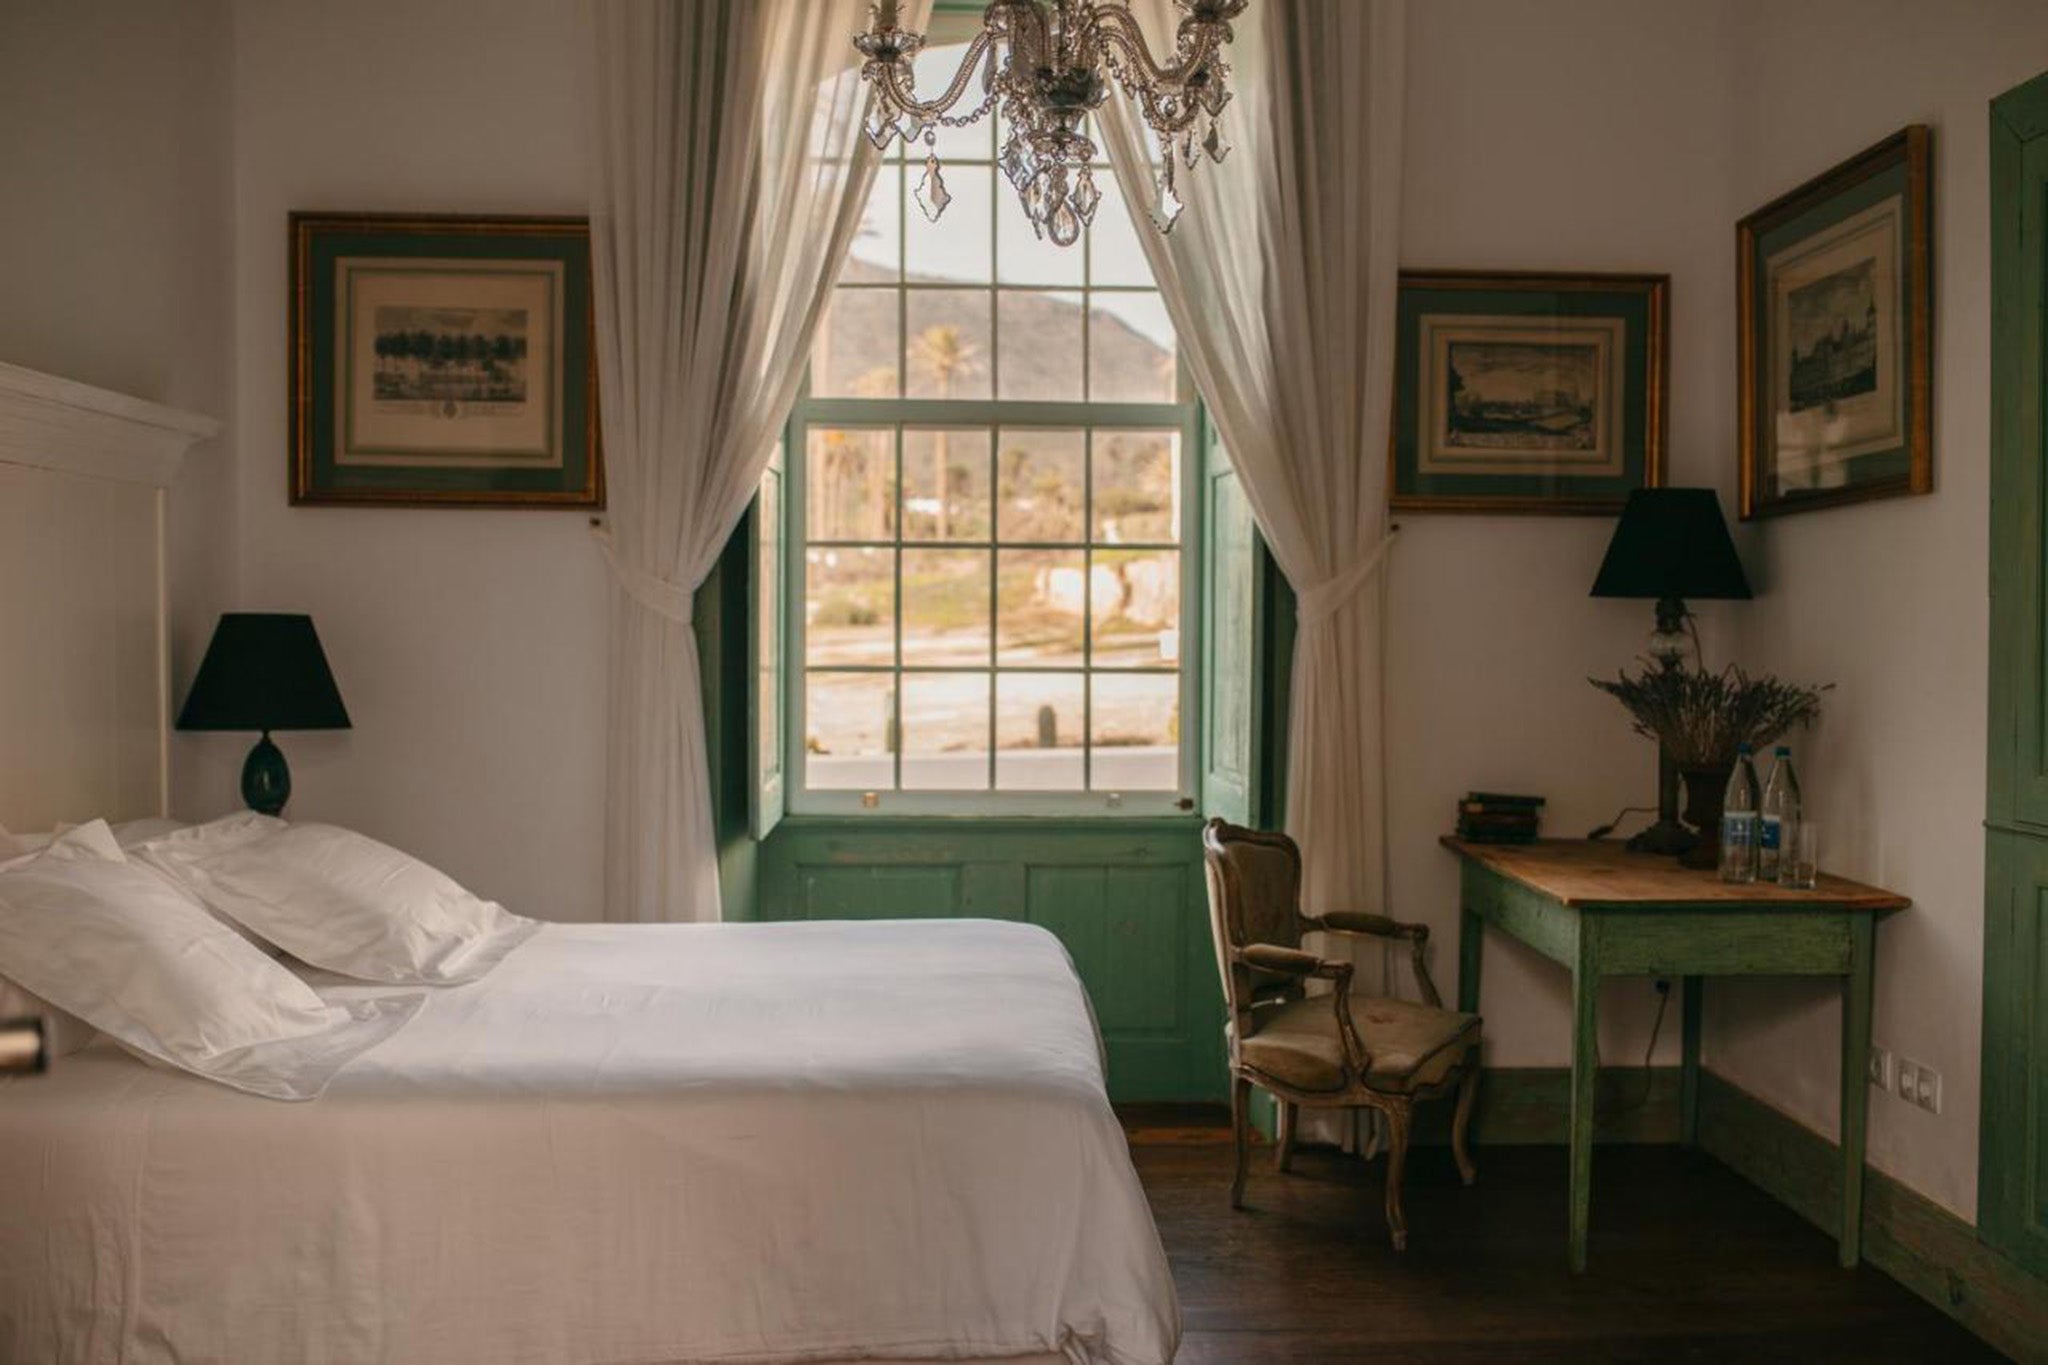 Rooms are steeped in charm at this restored 200-year-old family home